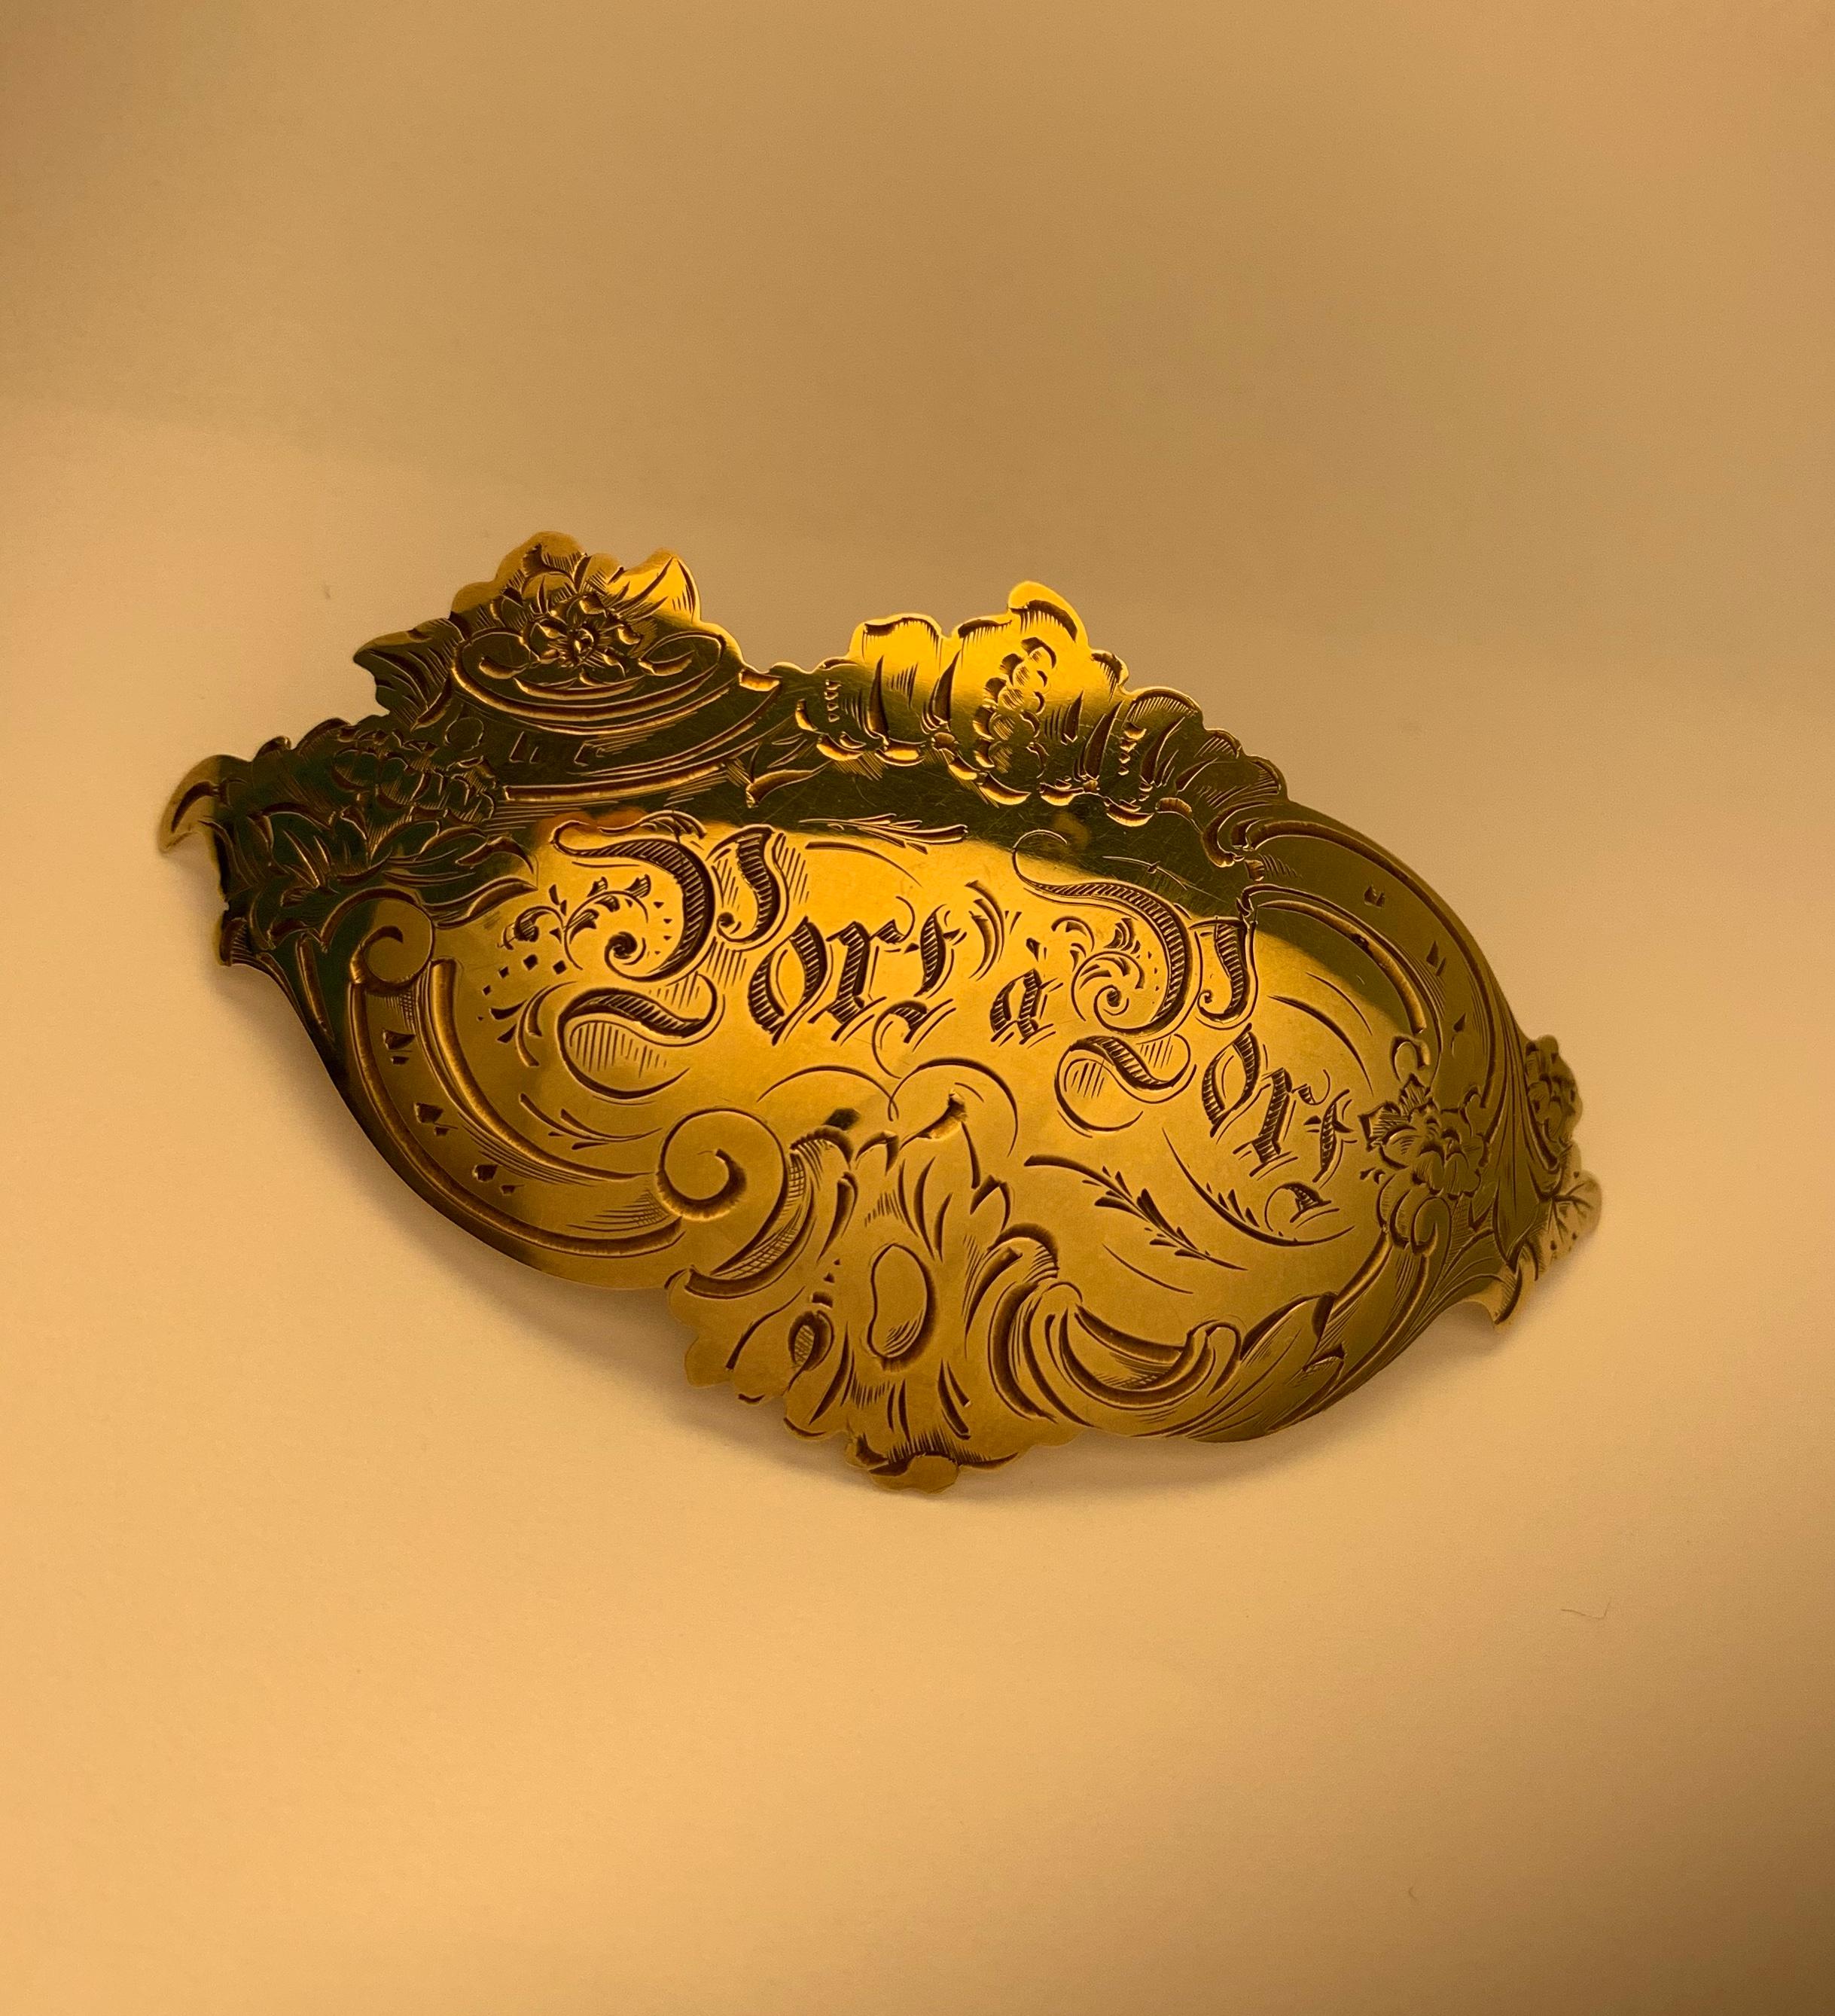 Very rare decanter label for Port (carved curly letters reading “Port”) in solid gold from round 1863 (inscription), most likely an anniversary present. Inscription reads “1813 10 Februarij 1863” (which is old Dutch spelling for February). The label